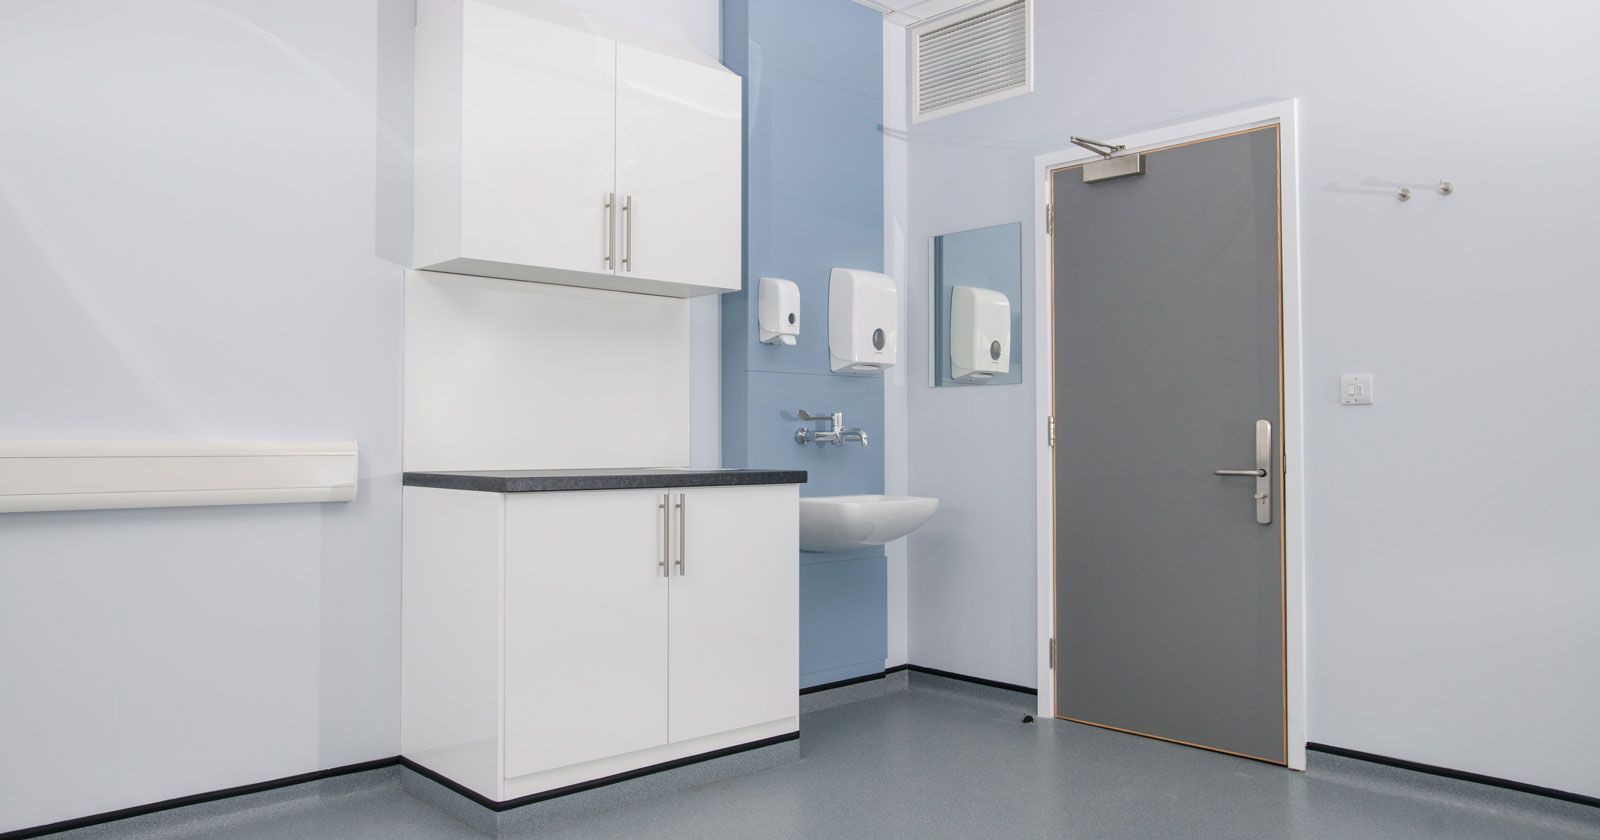 Queensgate Medical Centre storage in consultation room Designed and installed by APSS Joinery